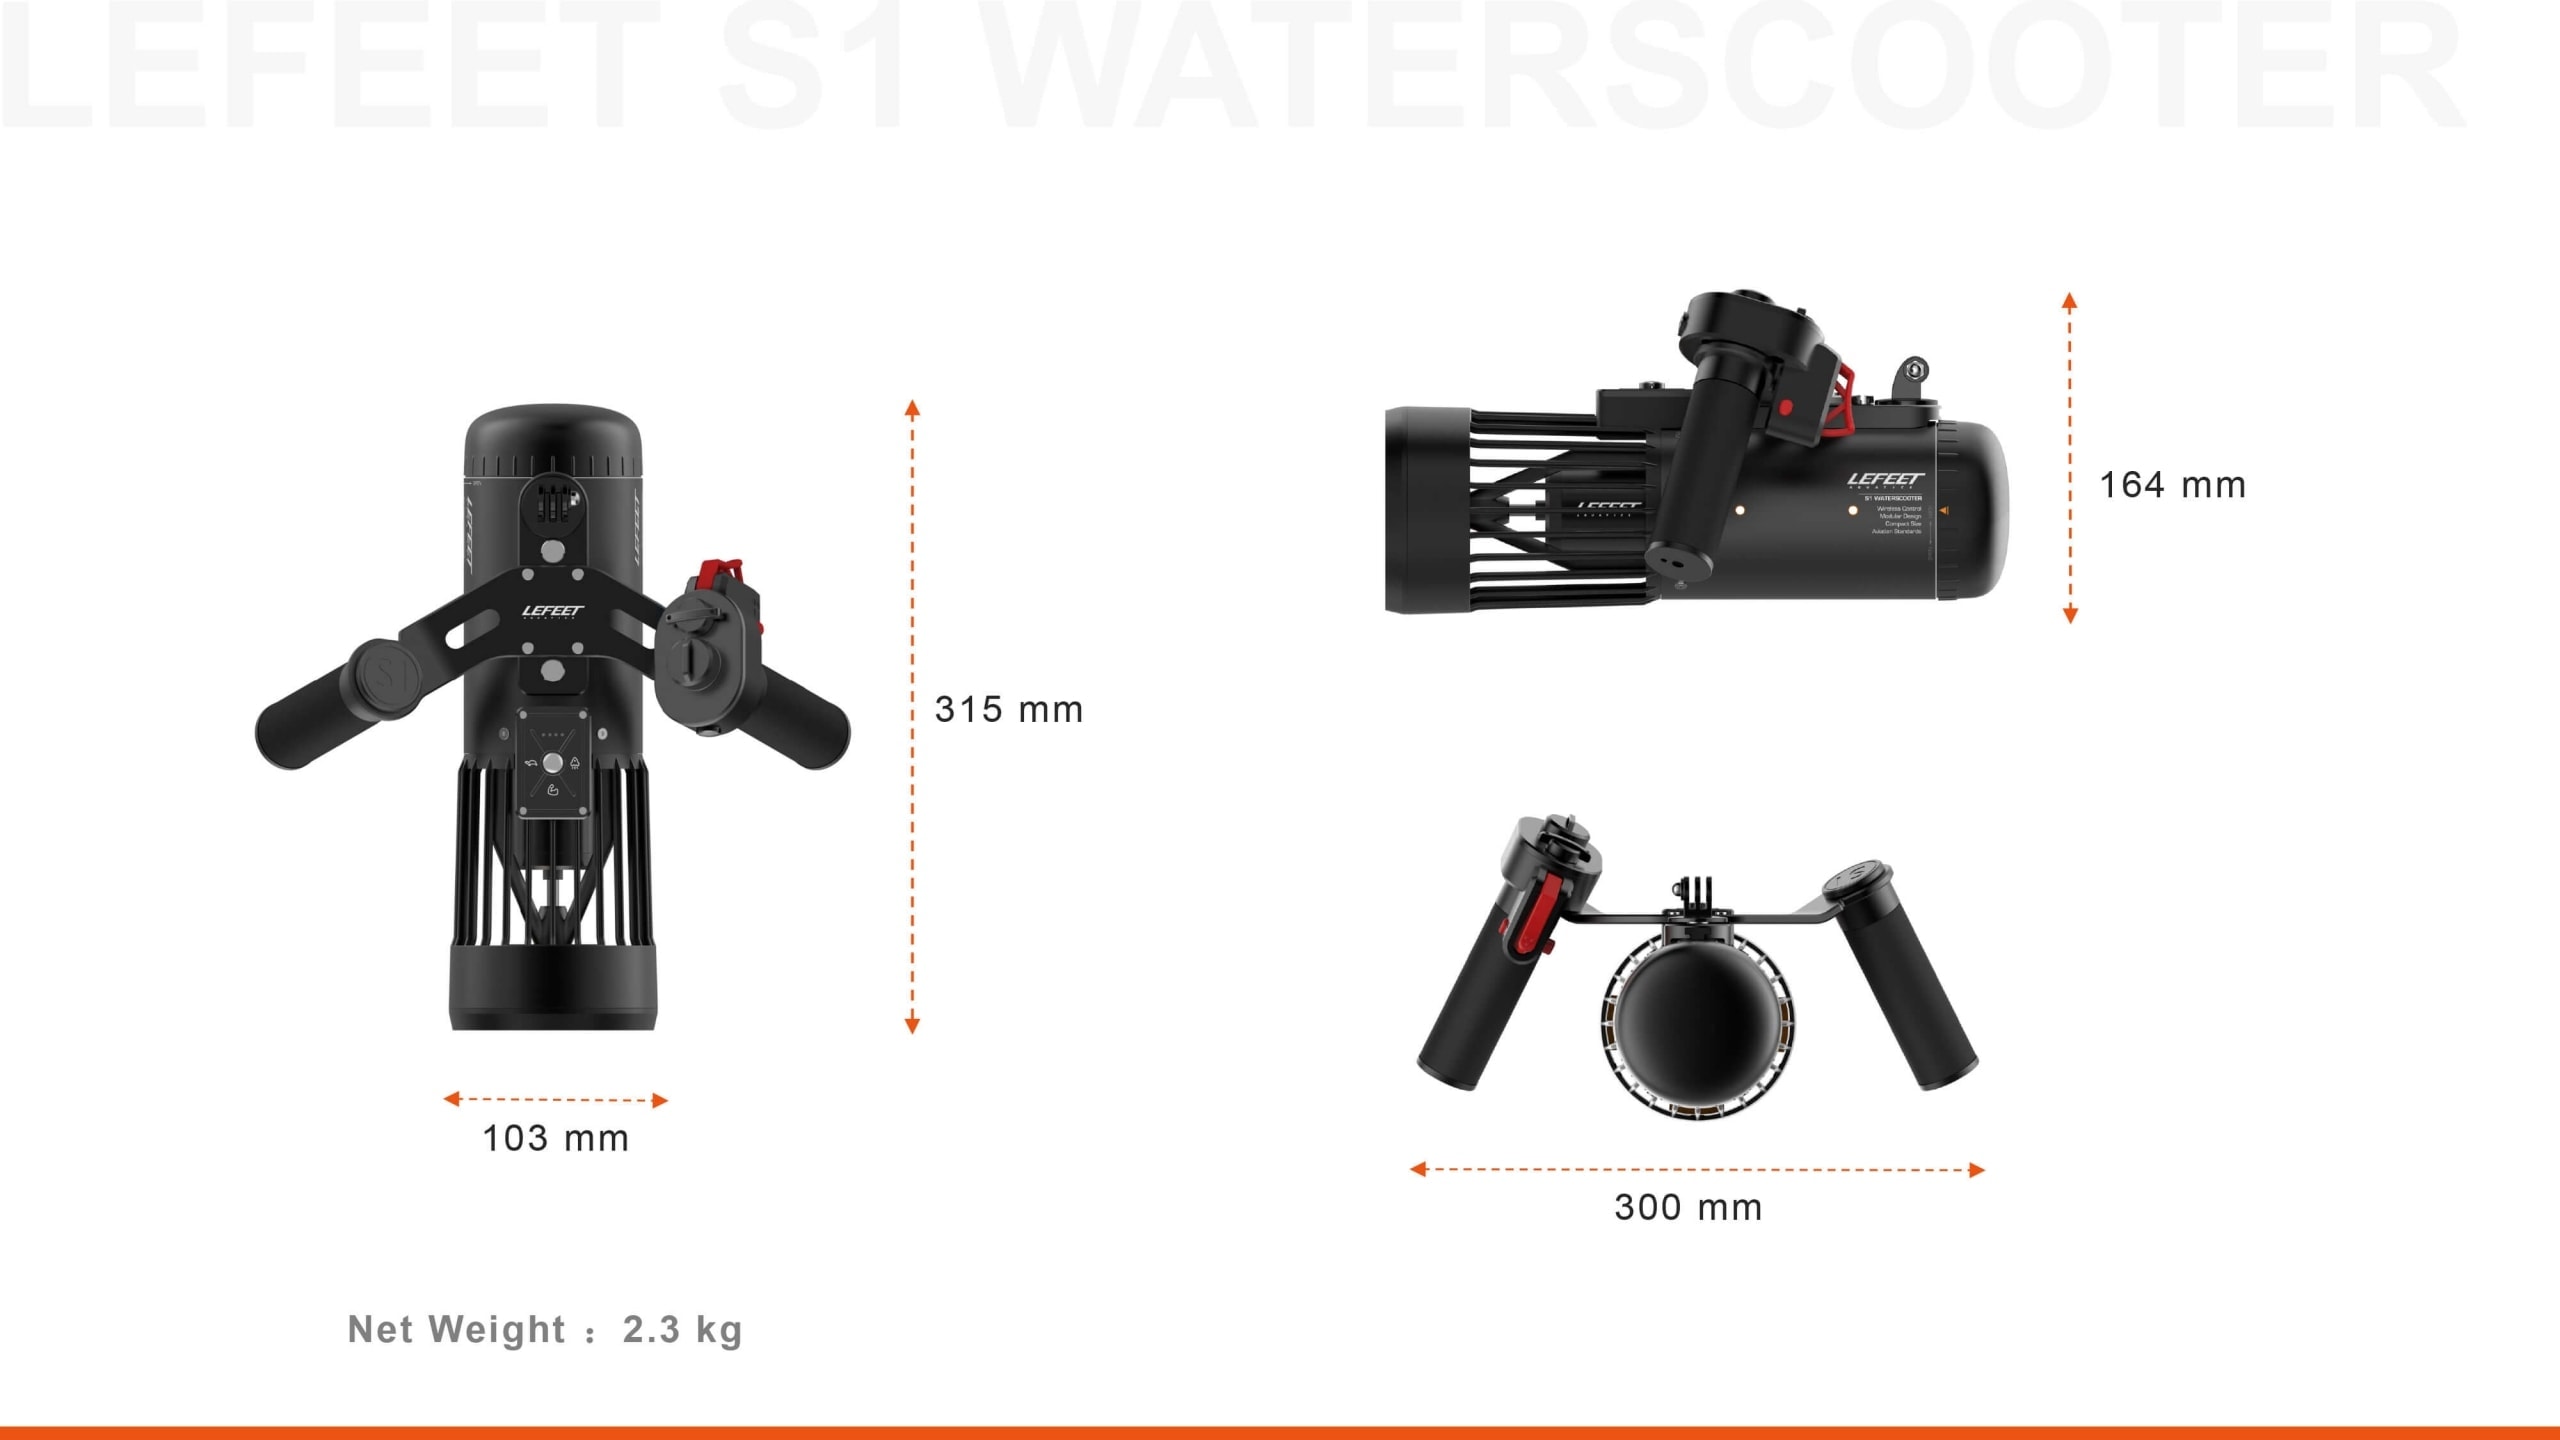 LEFEET S1 electric water scooter dimensions